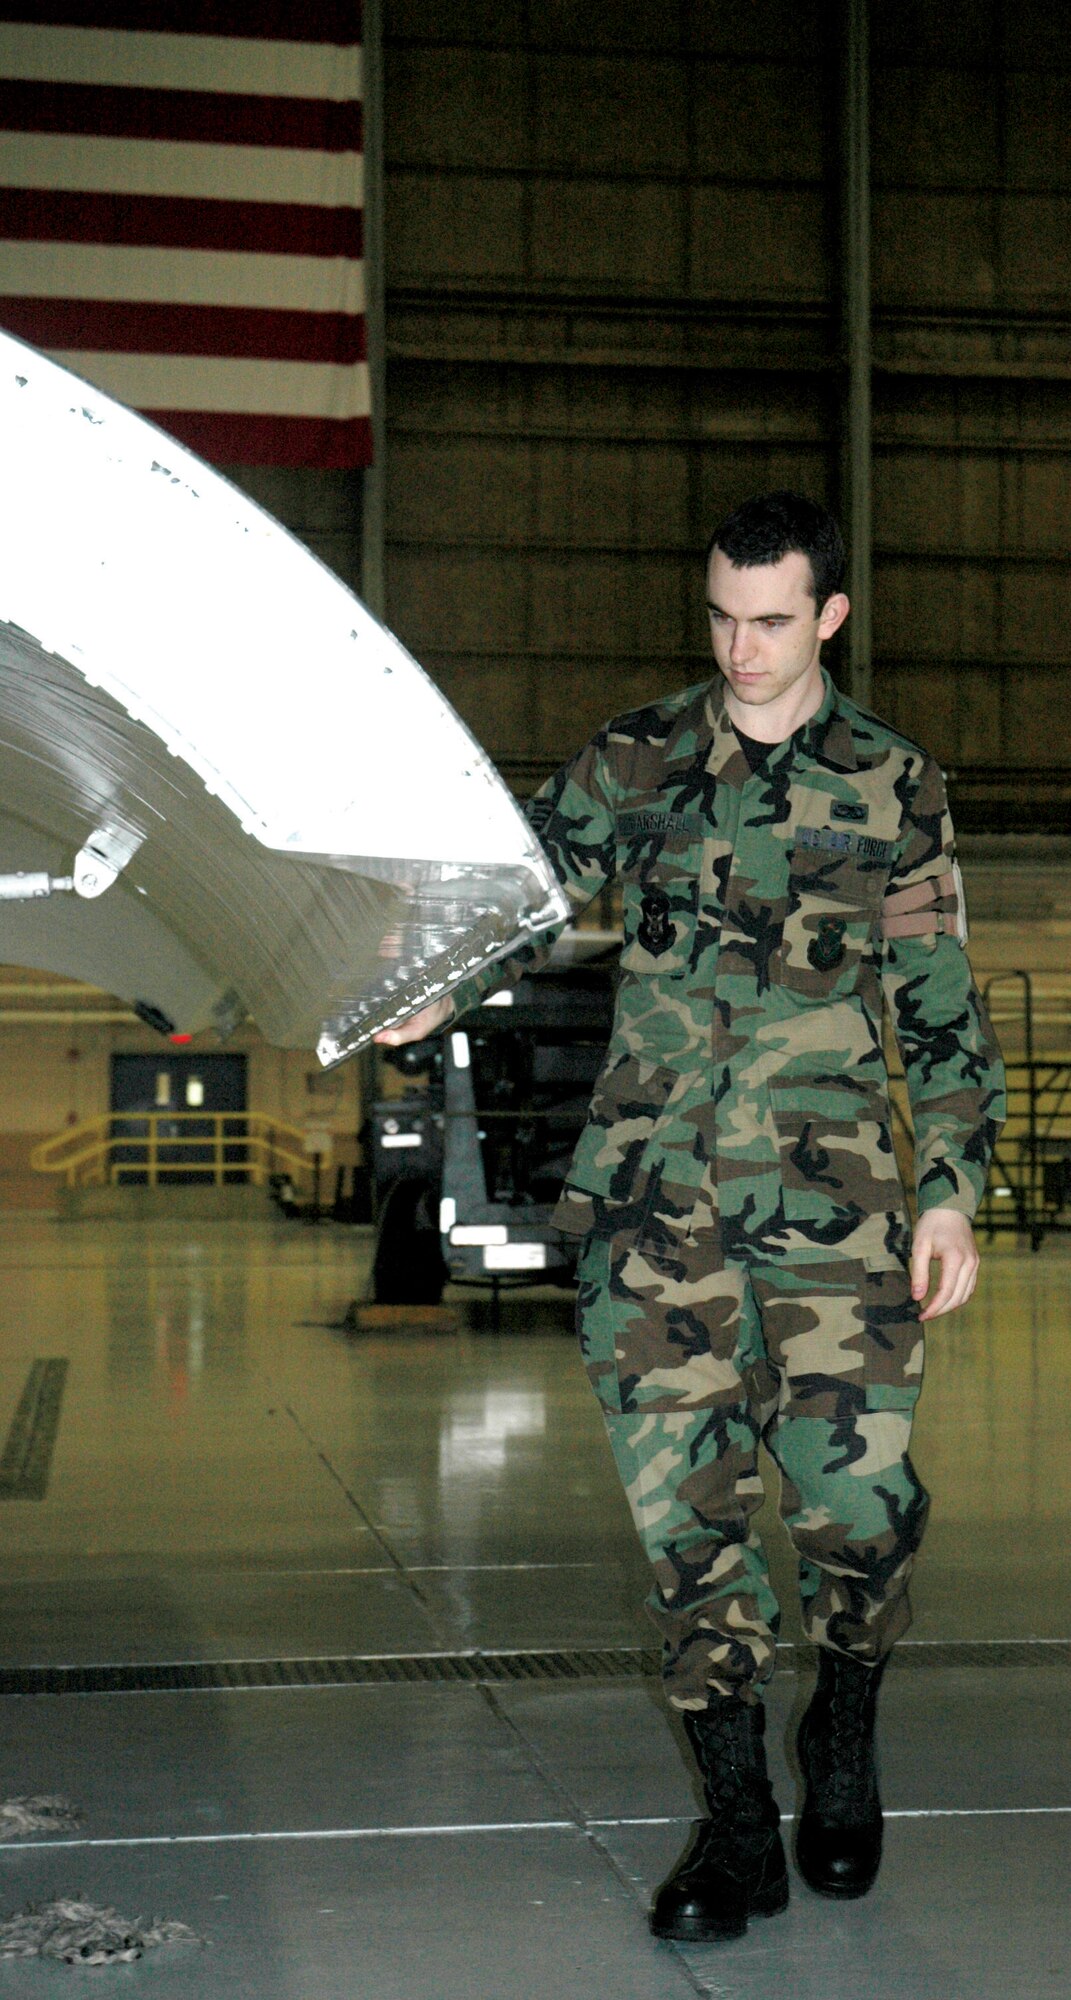 McCHORD AIR FORCE BASE, Wash. - Staff Sgt. Robert Marshall inspections a C-17 as part of his maintenance duties with the 446th Maintenance Squadron here.  Sergeant Marshall, a n Air Force Reserve Airman, returned to duty in March after battling non-Hodgkins lymphoma. U.S. Air Force photo/Sandra Pishner